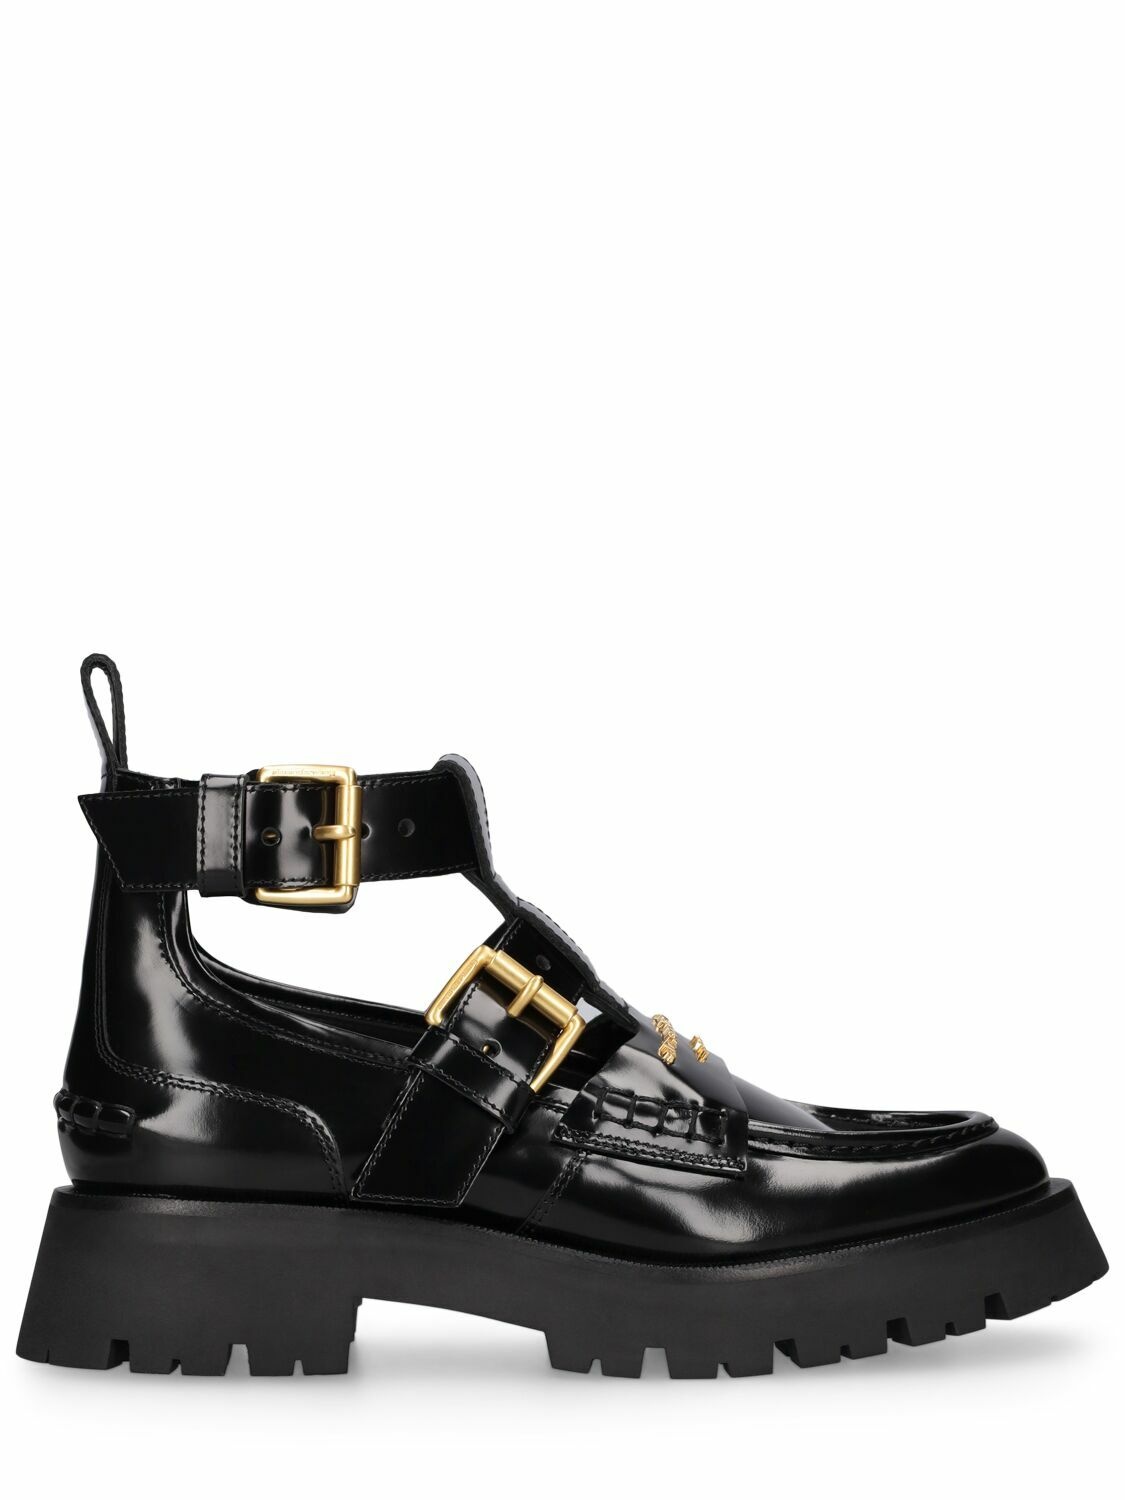 Photo: ALEXANDER WANG - Carter Lug Patent Leather Ankle Boots